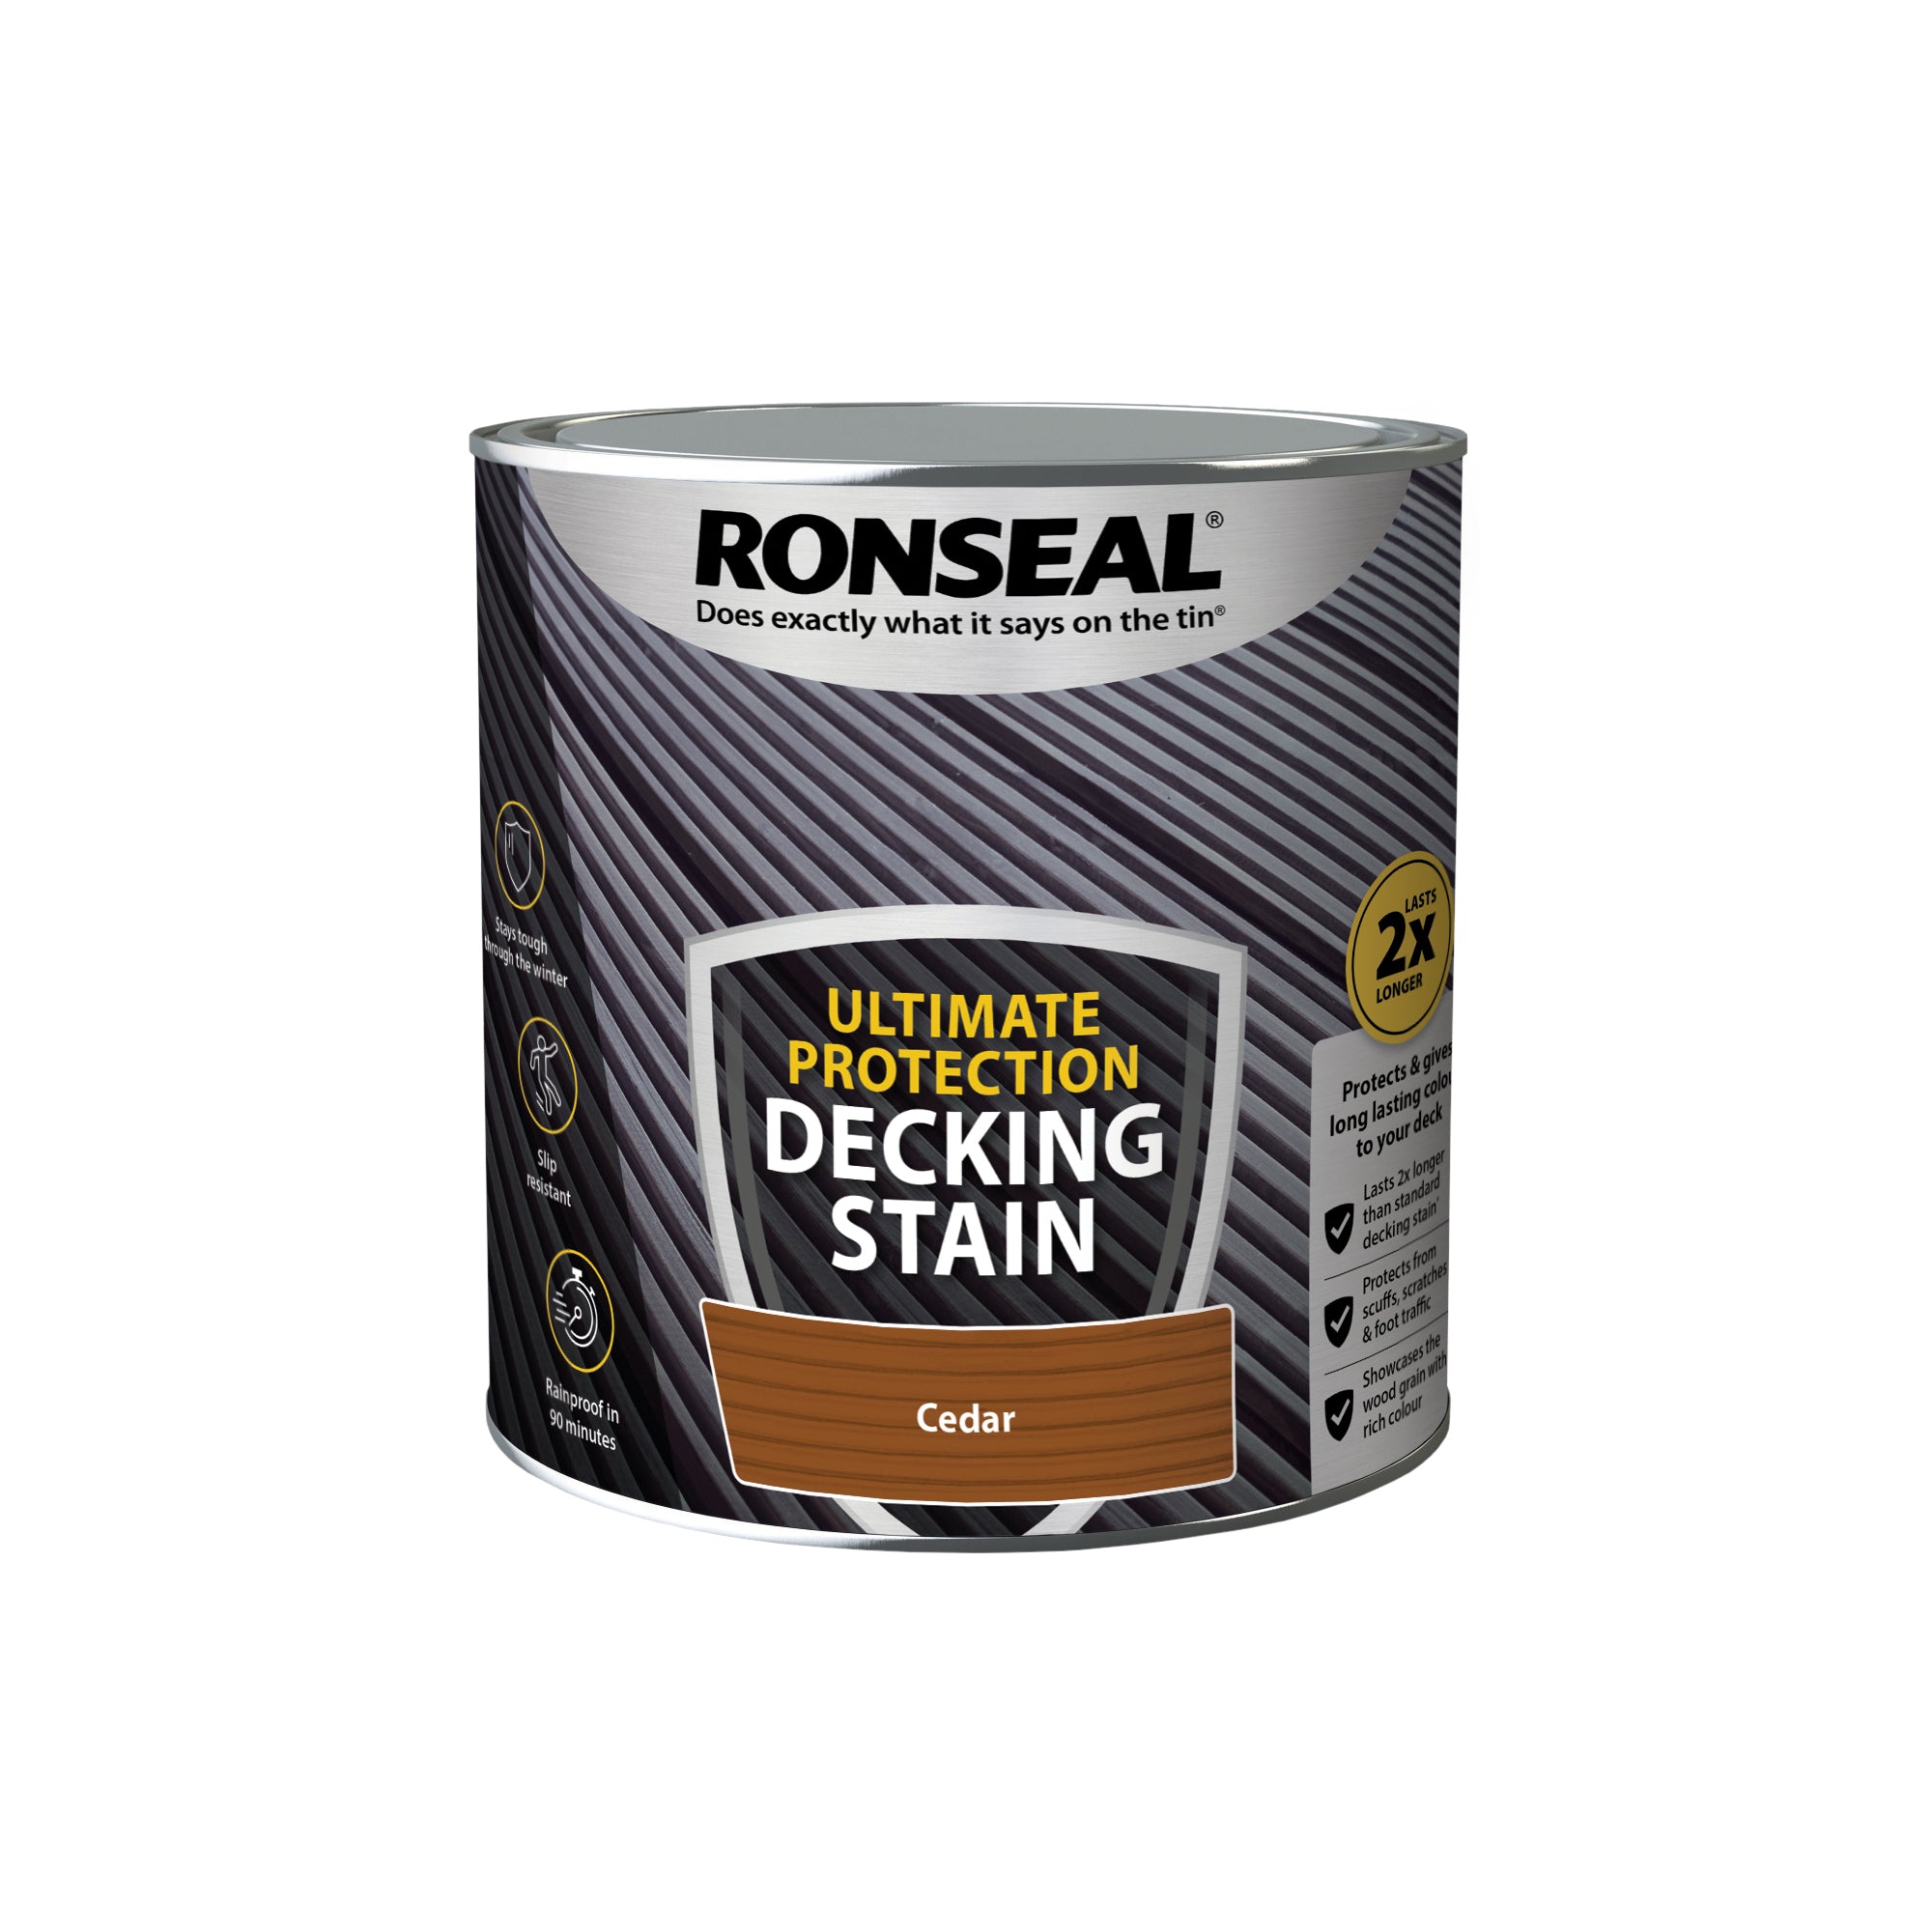 Ronseal-Ultimate-Protection-Decking-Stain-Cedar-2.5L